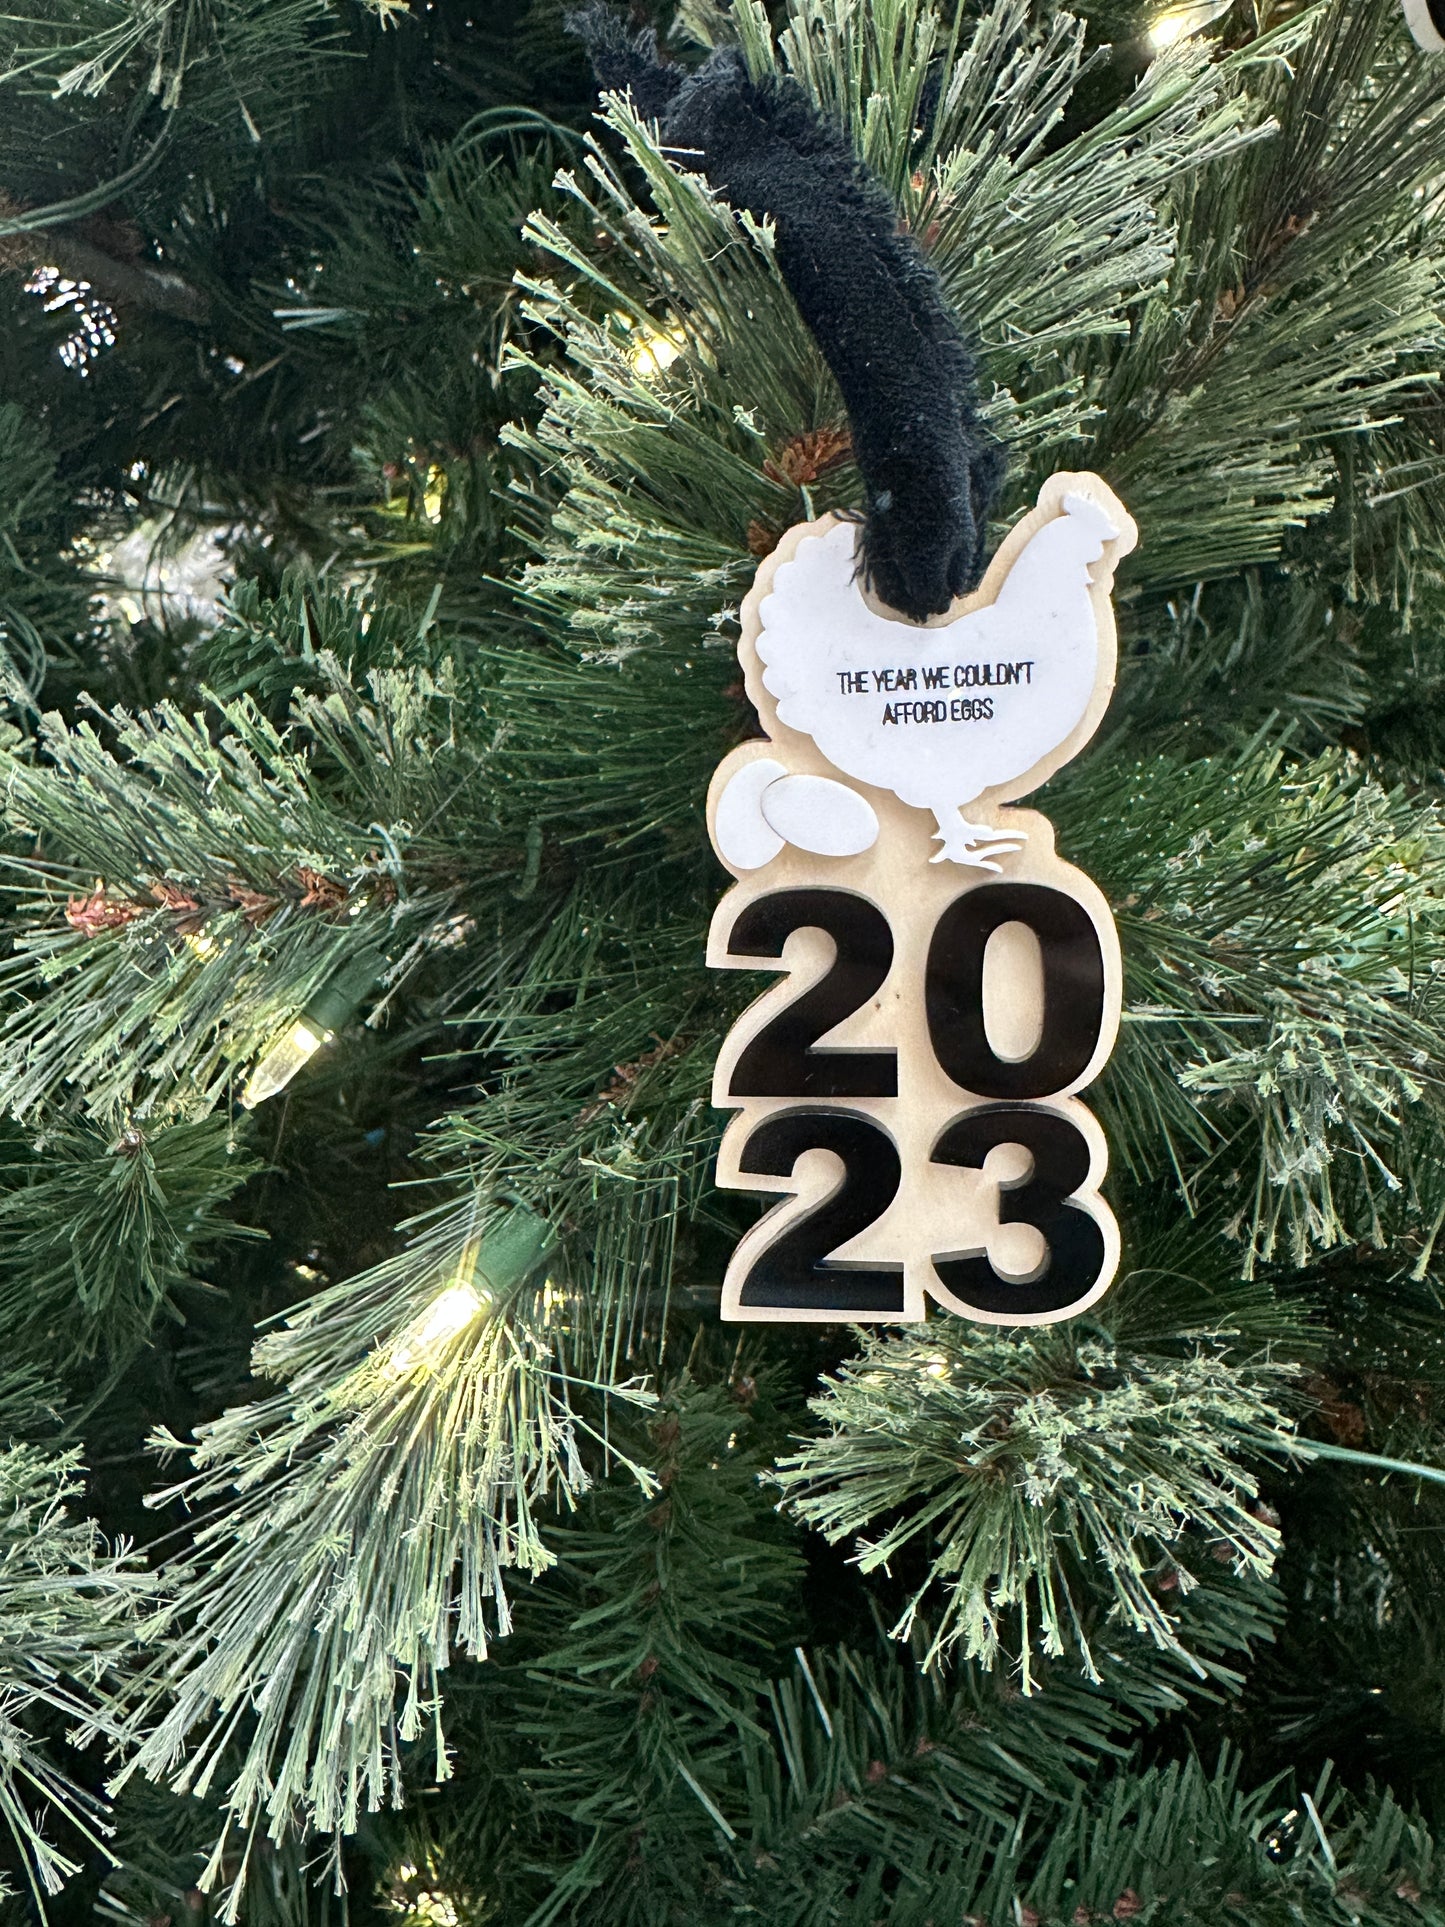 2023: the year we couldn’t afford eggs ornament